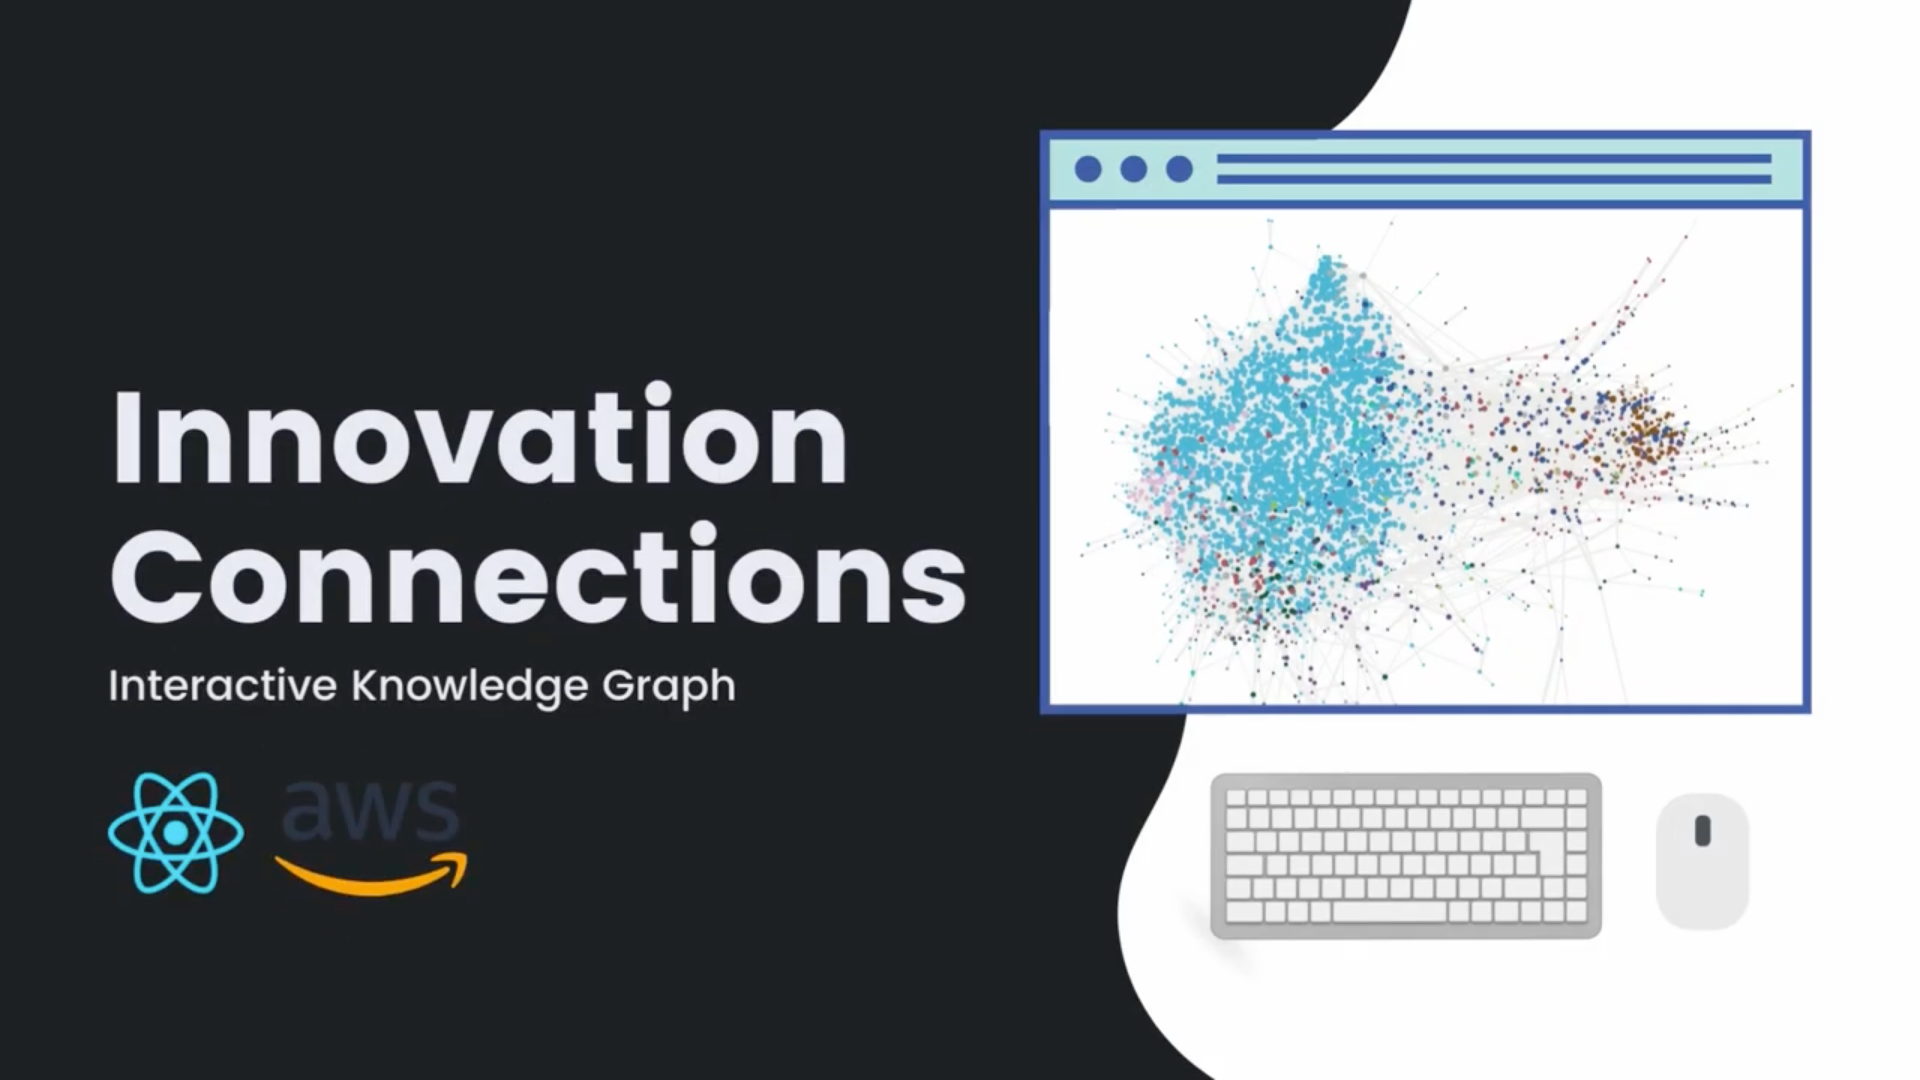 On the right of the cover image is the project's title: Innovation Connections. On the left is a computer screen displaying the knowledge graph.